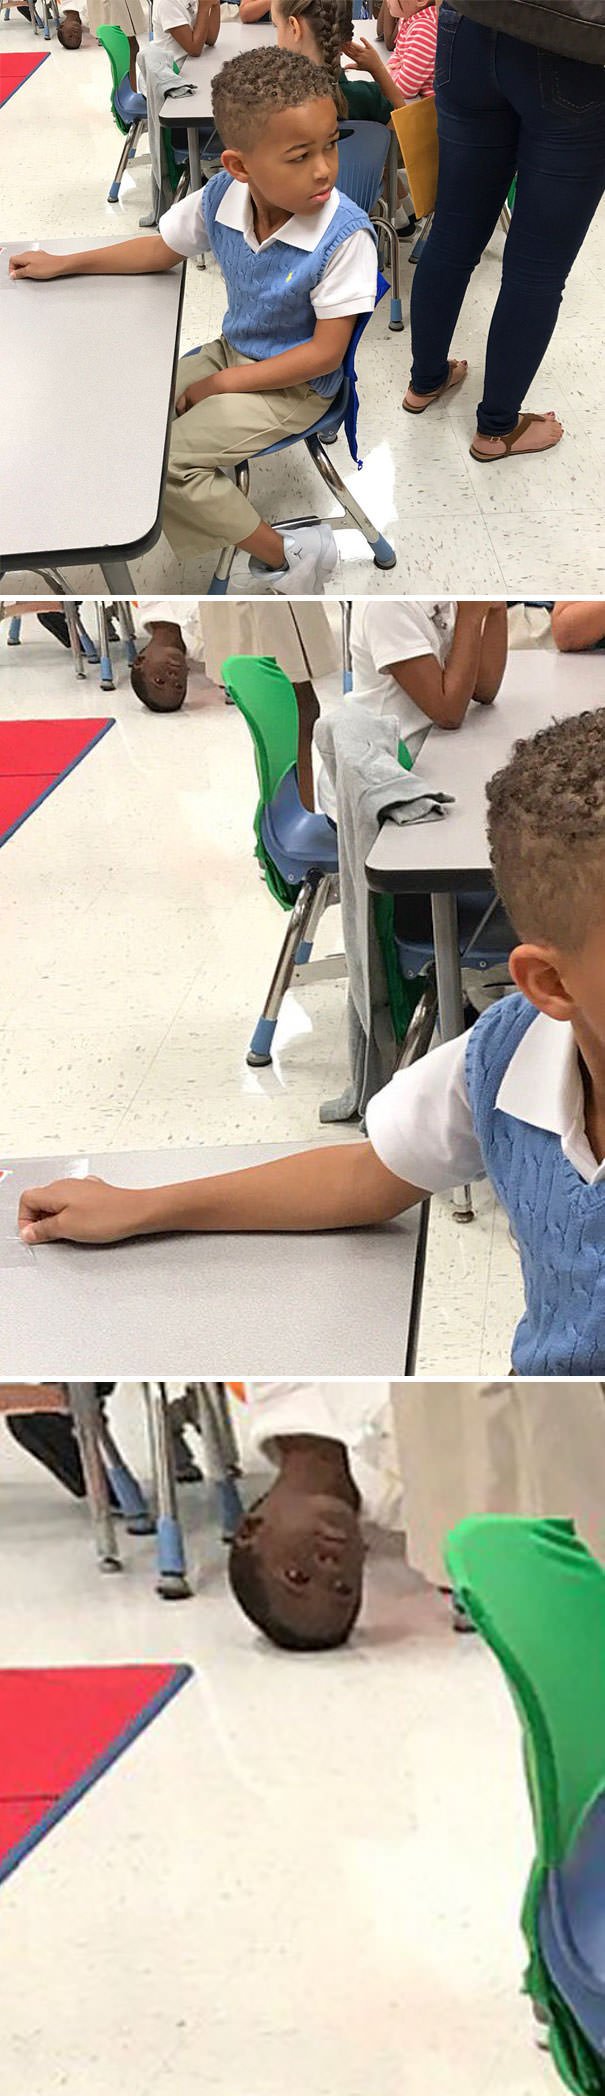 My Sister Was Taking Pictures Of My Nephew At School And The Little Guy In The Back Looks Miserable